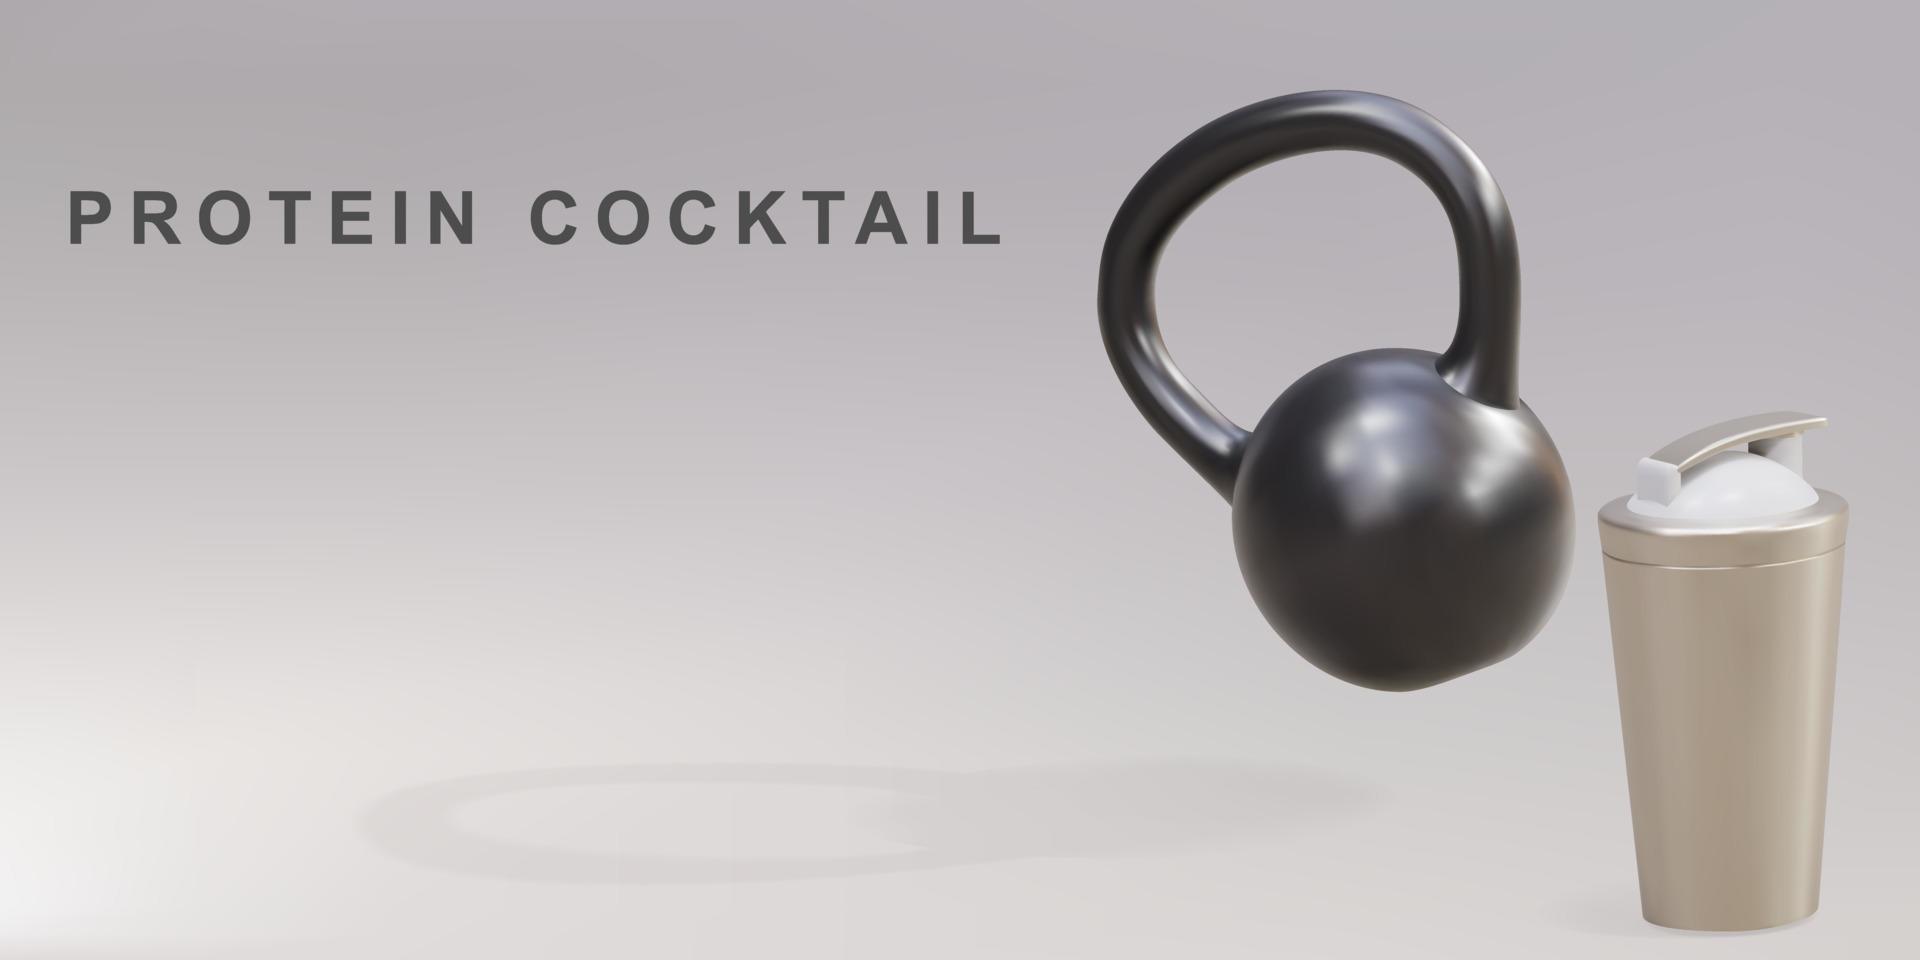 3d golden shaker and kettlebell - protein cocktail concept. Vector illustration.